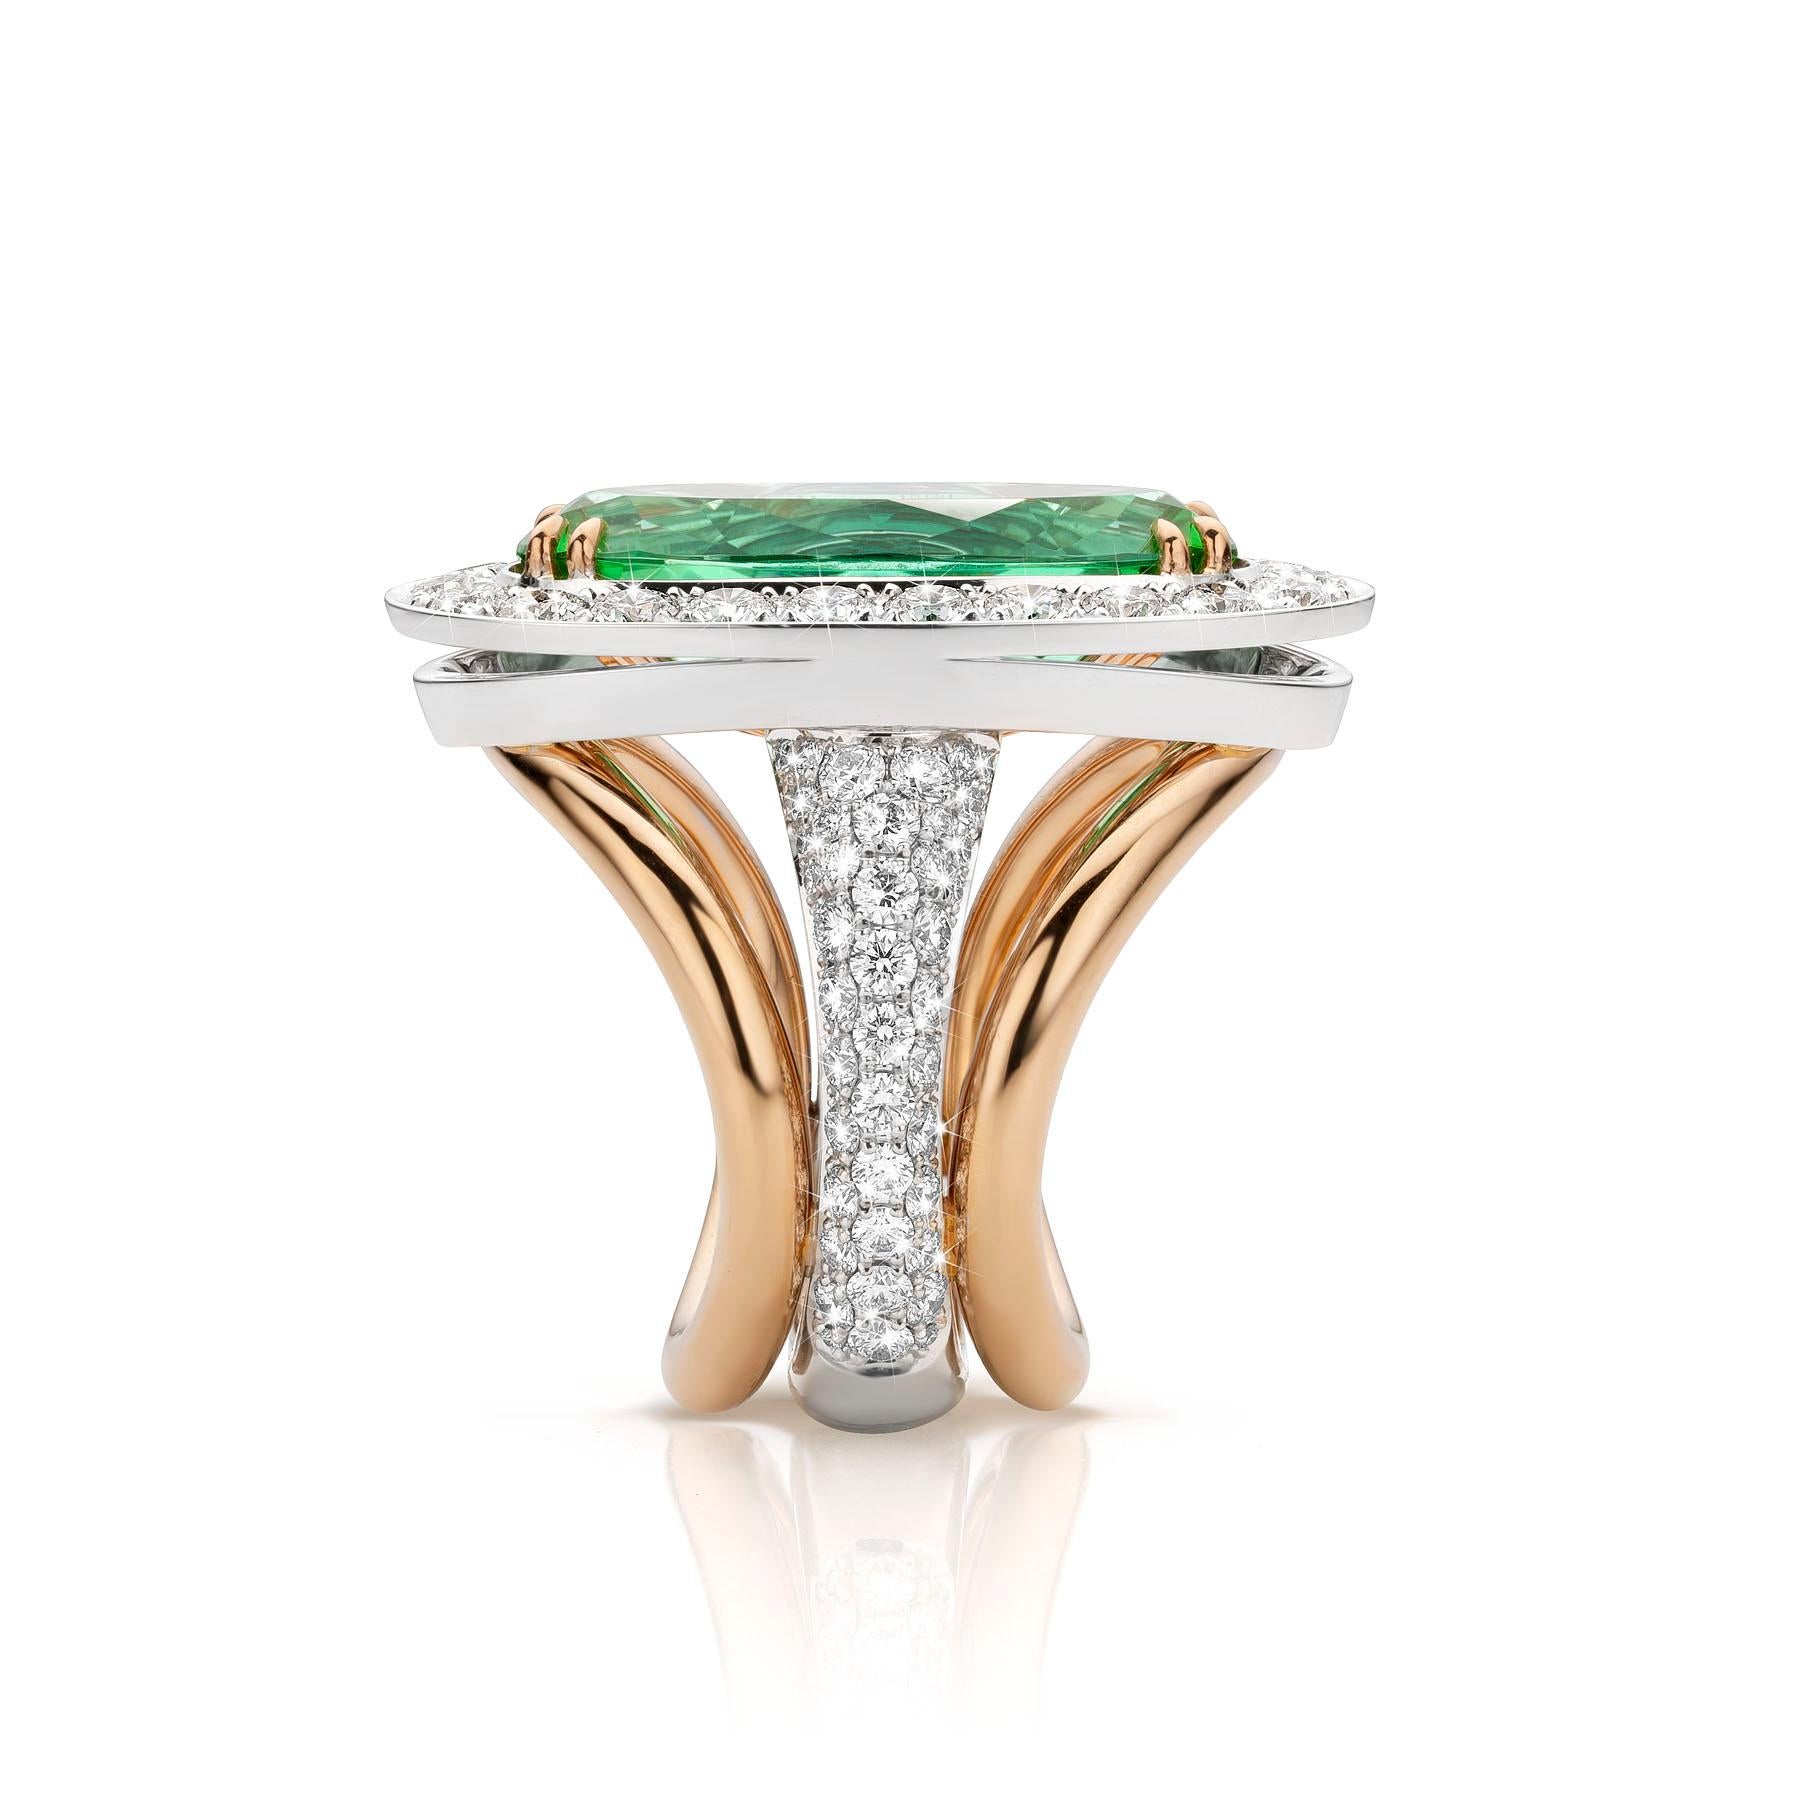 Contemporary 18K White & Yellow Gold 10.37 Carat Mint Tourmaline Cocktail Ring by Jochen Leën For Sale